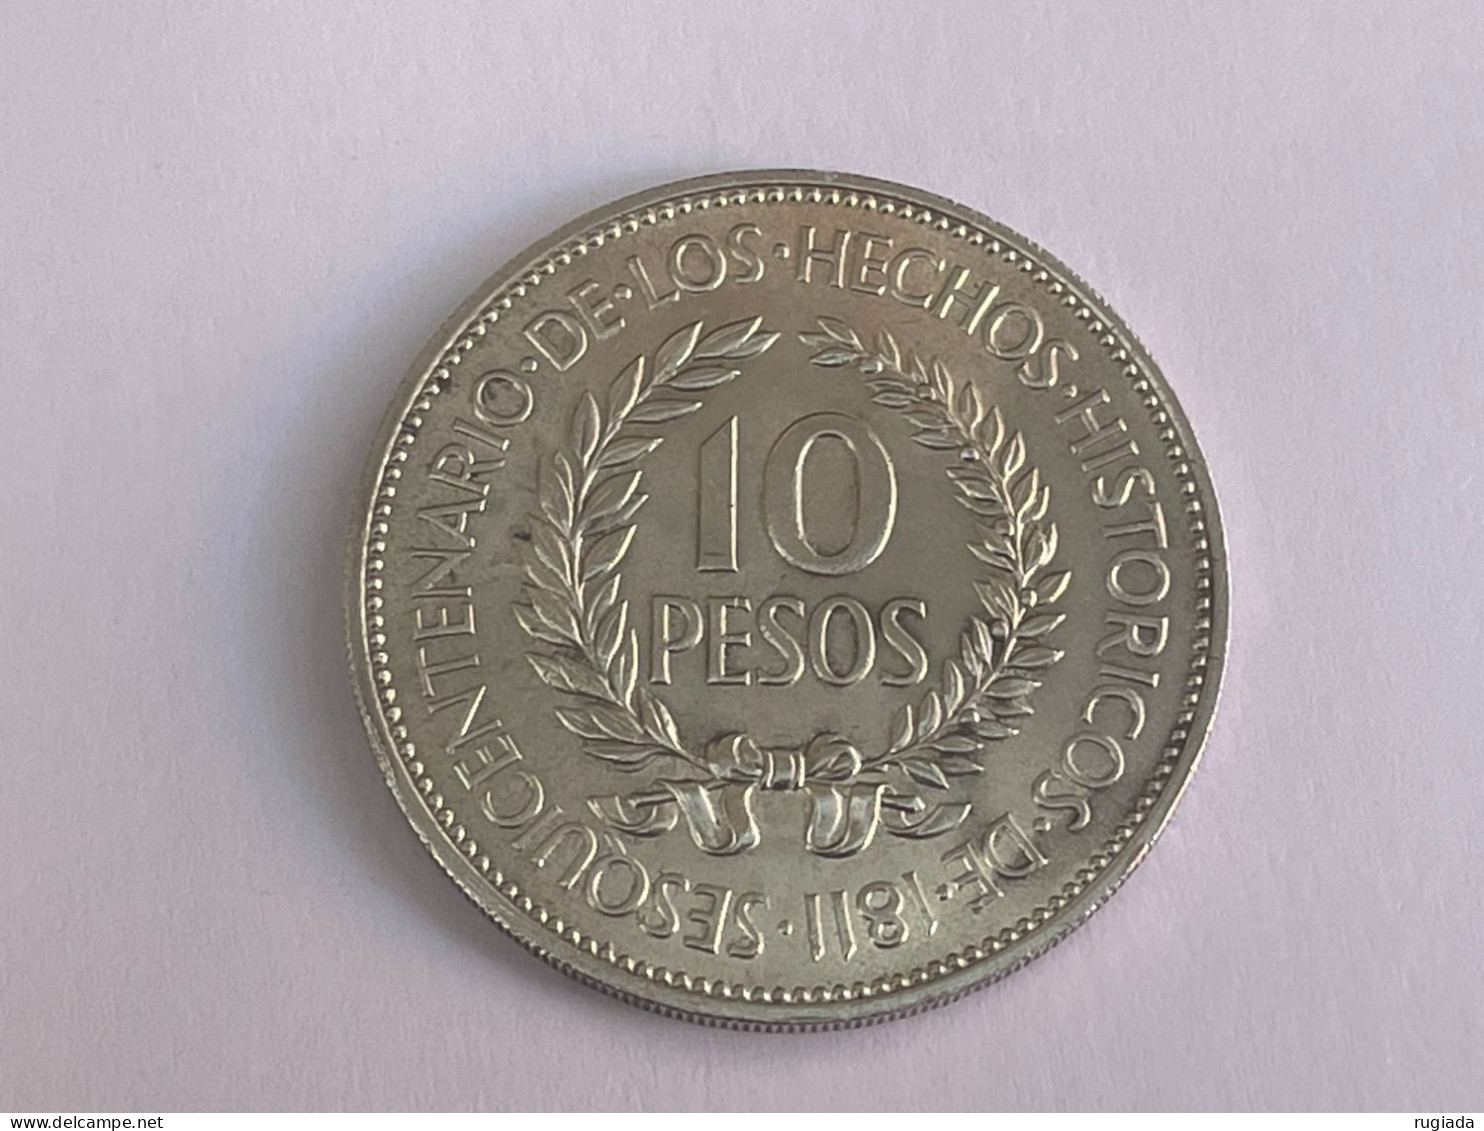 1961 Uruguay 10 Peso Coin, Silver (0.9) Coin, AU About Uncirculated - Uruguay